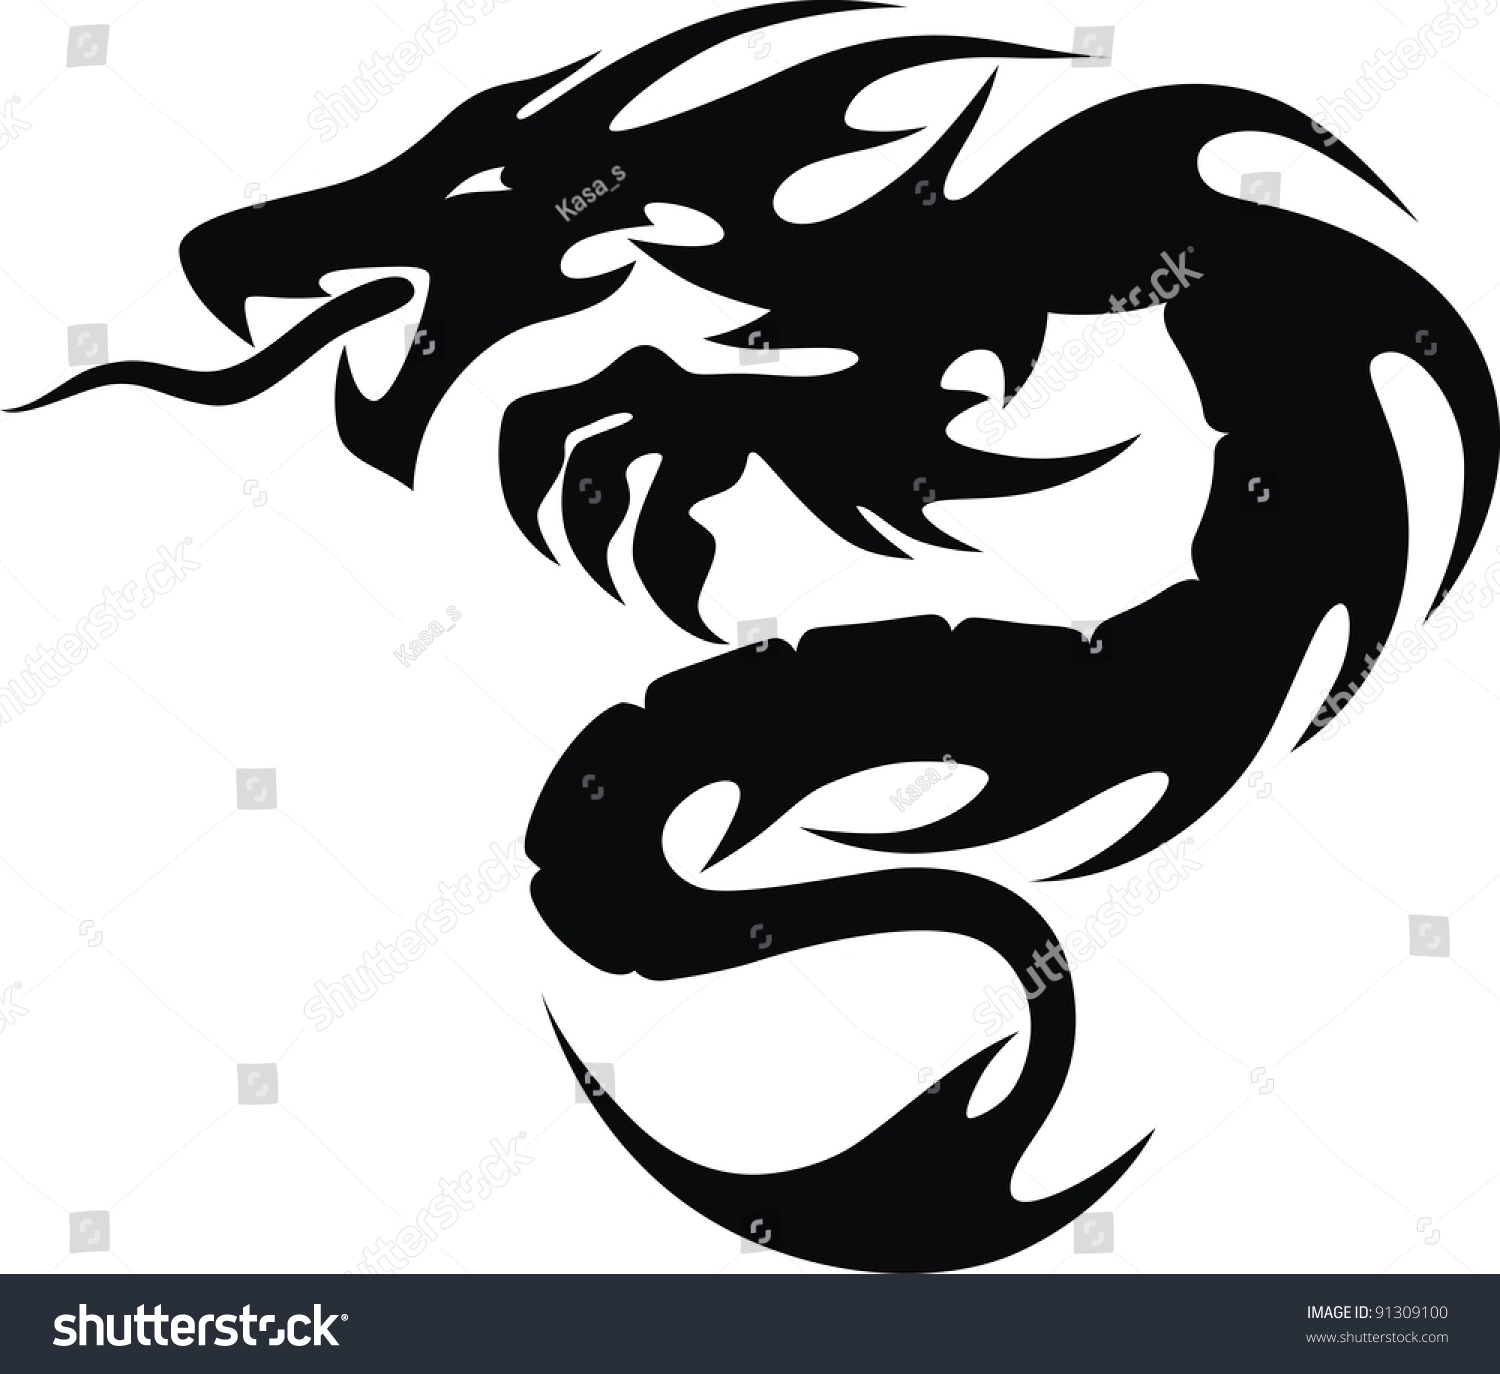 The Stylized Dragon In The Form Of A Tattoo Stock Vector Illustration ...